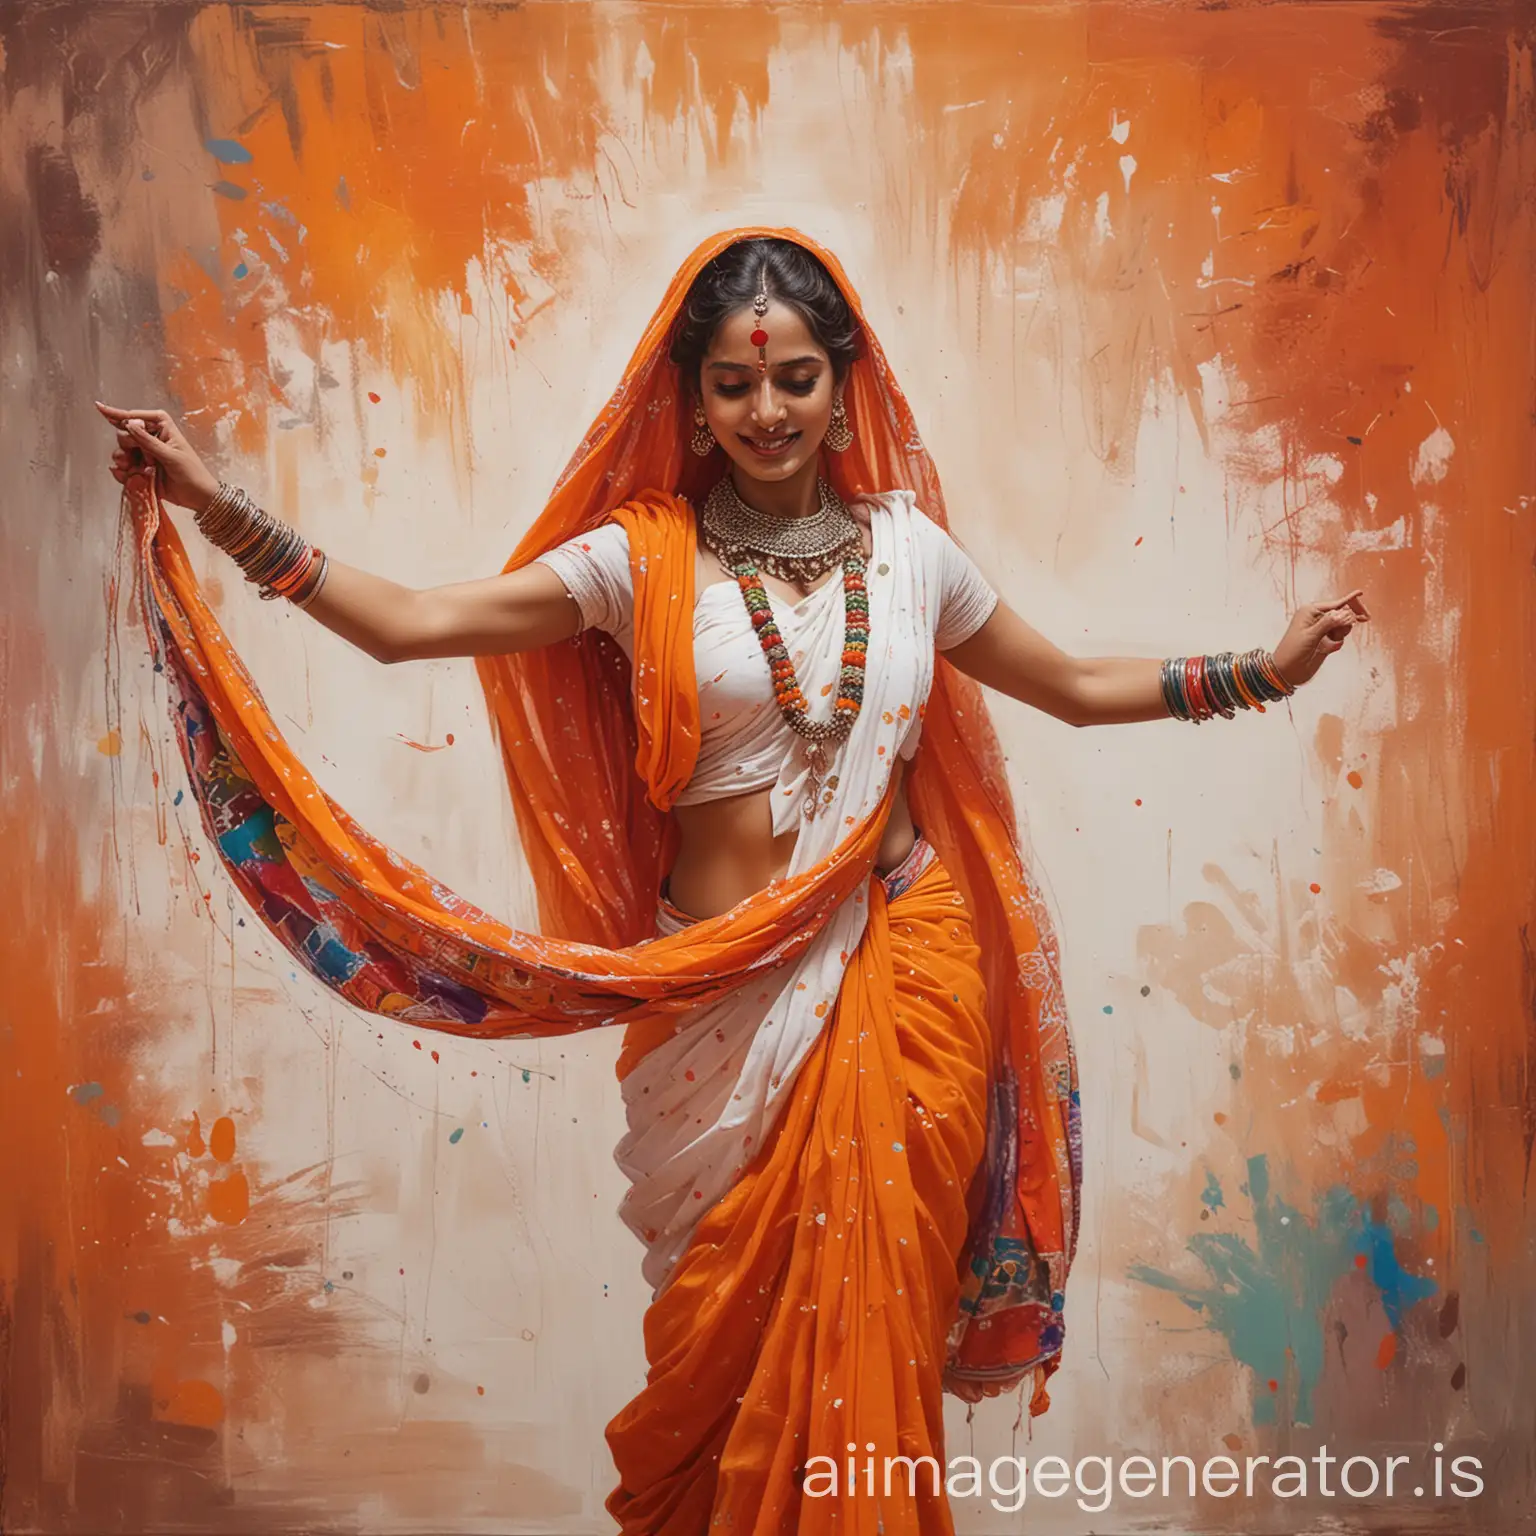 Traditional-Rajasthani-Woman-Dancing-with-Colorful-Paint-Strokes